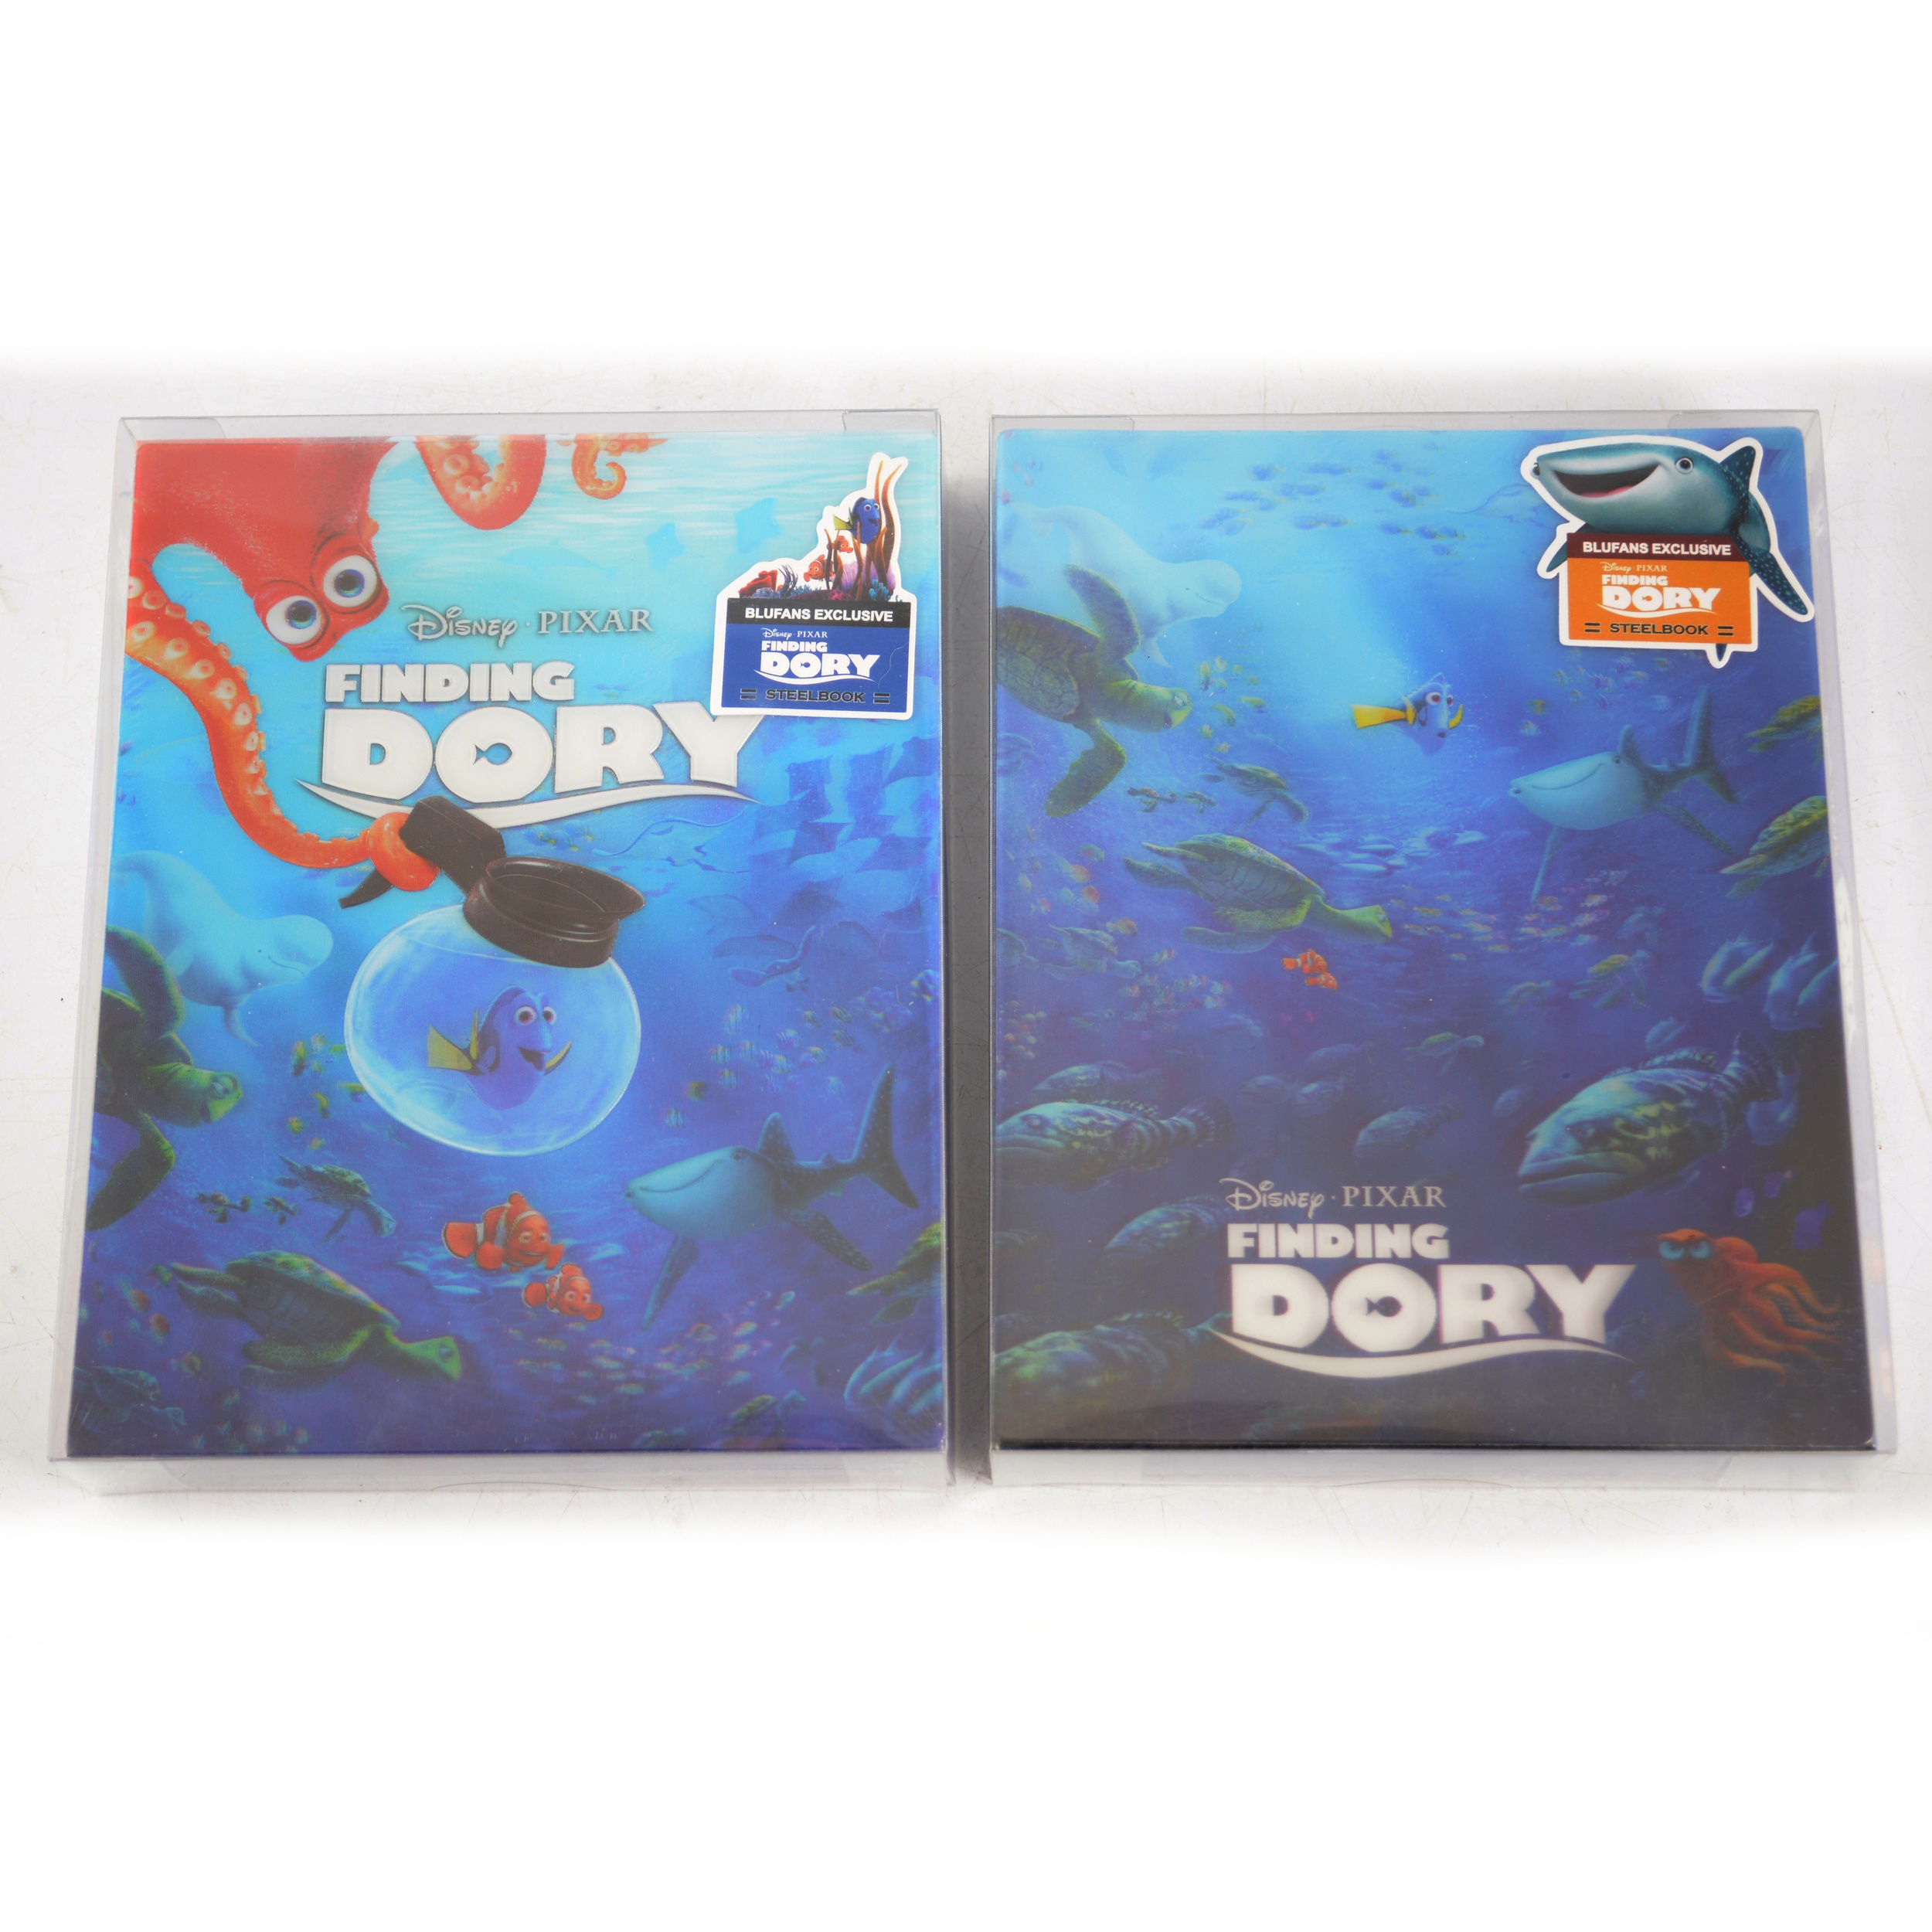 Two Blufans Exclusive Steelbook Lenticular Blue-rays; Finding Dory